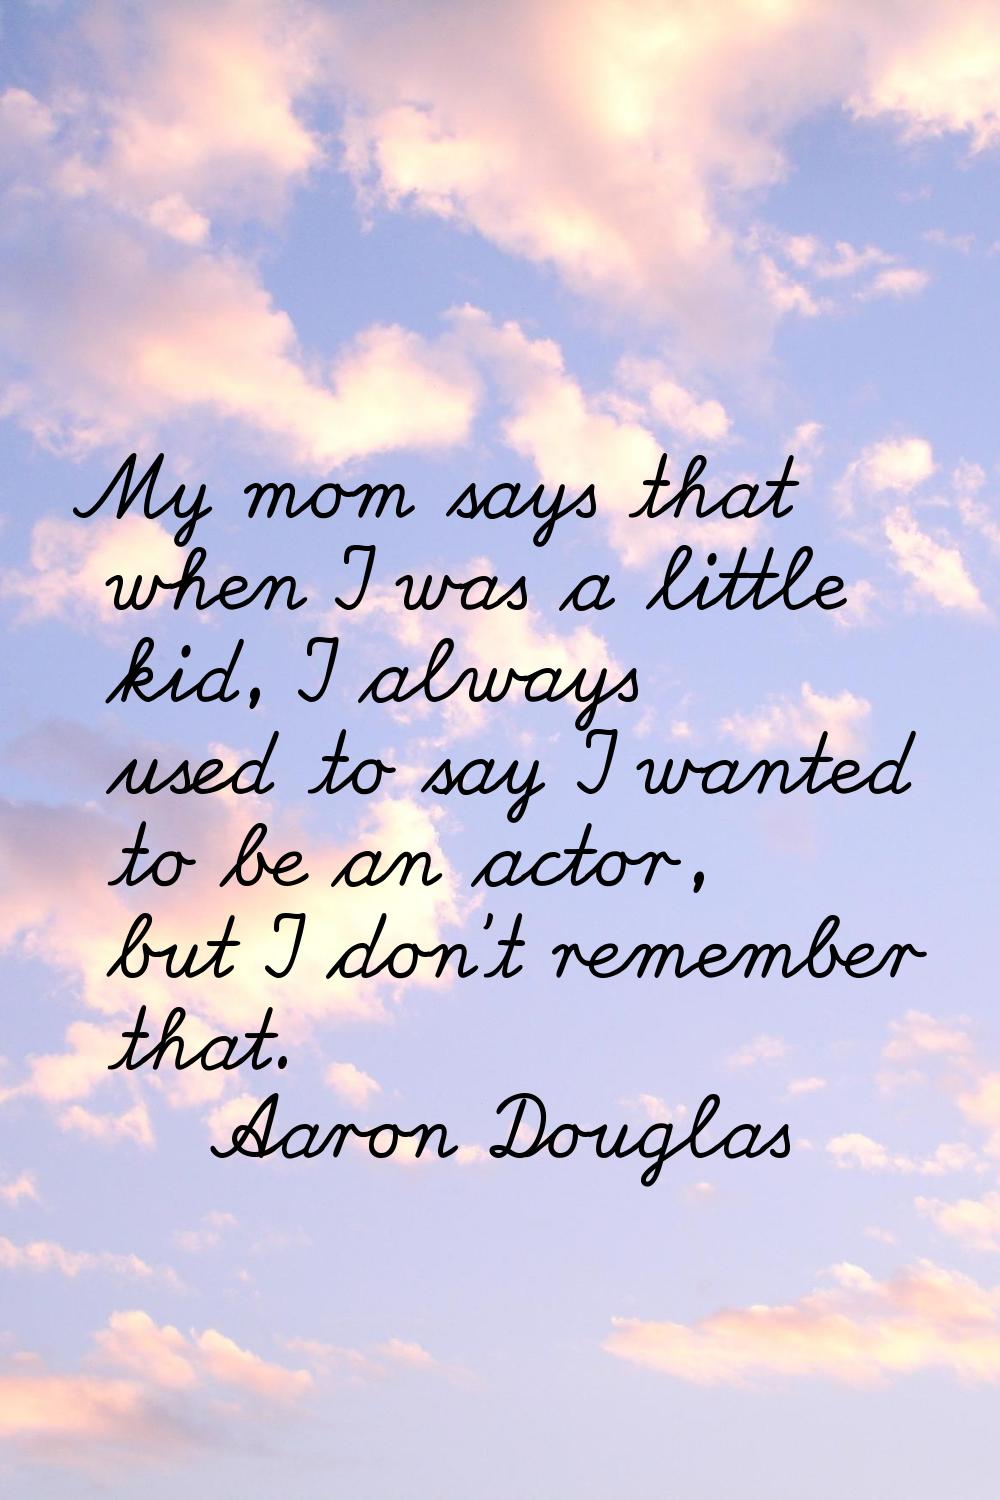 My mom says that when I was a little kid, I always used to say I wanted to be an actor, but I don't